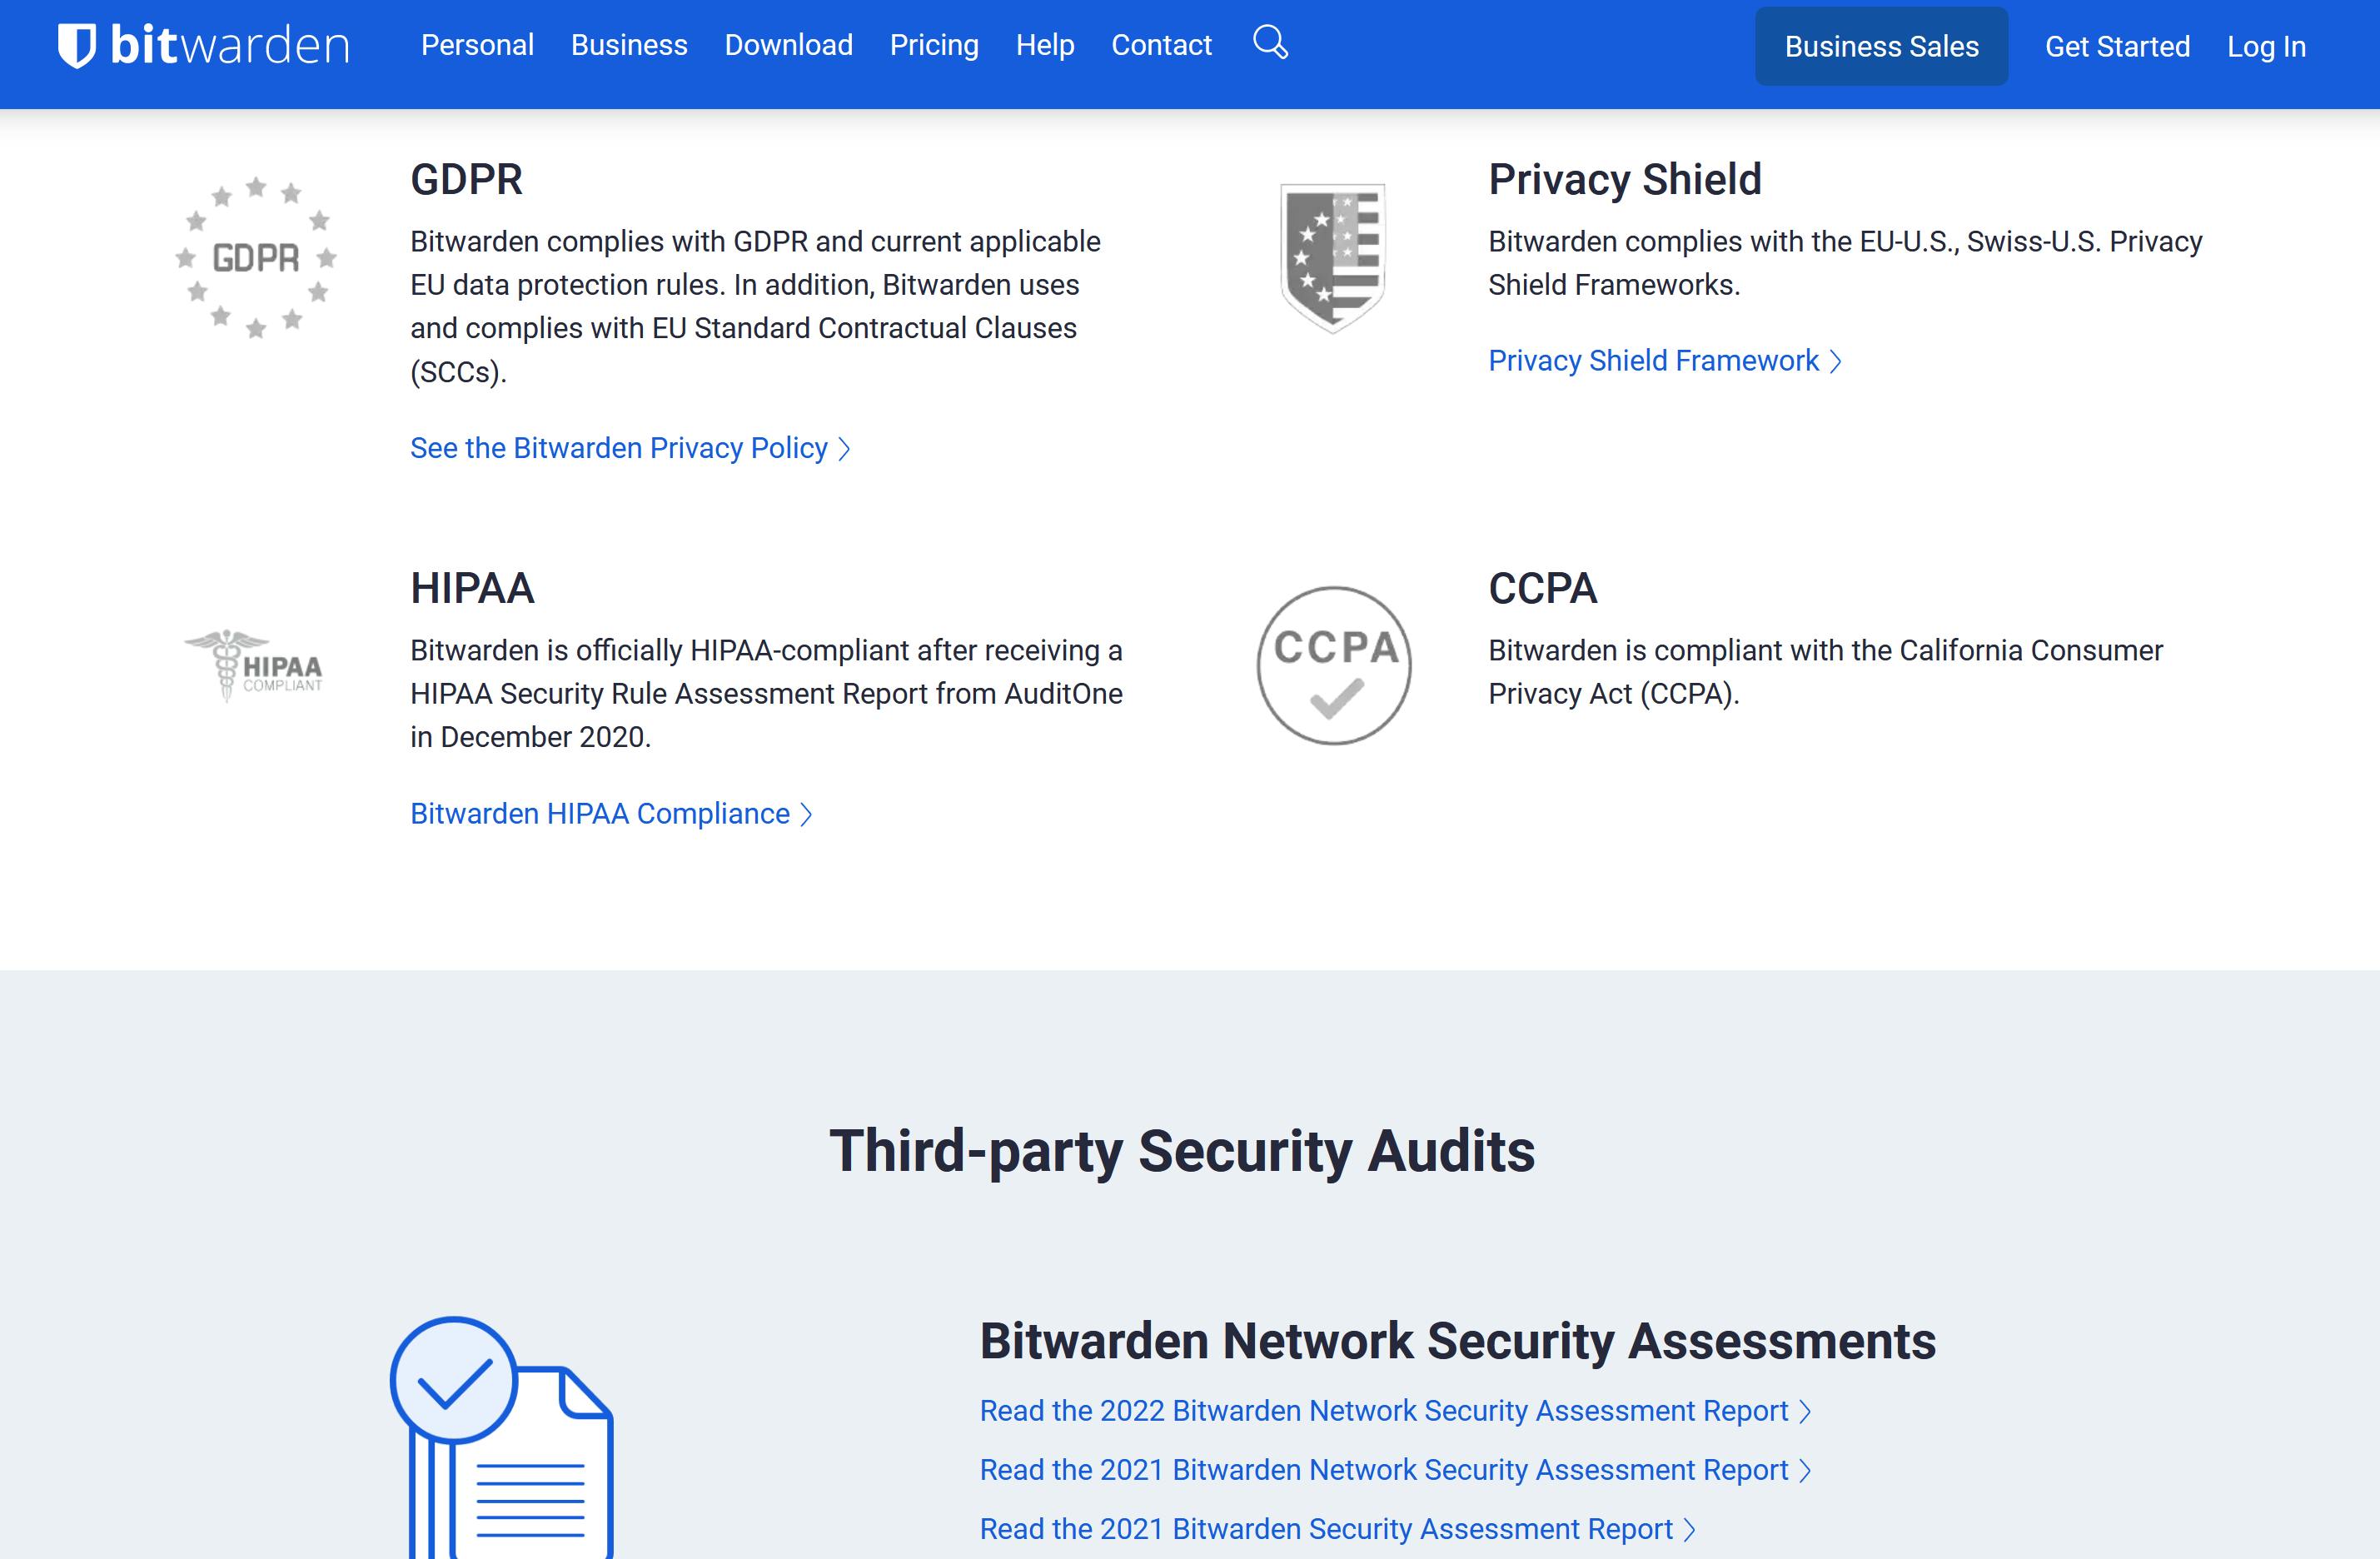 Bitwarden is complied with multiple regulations such as GDPR, and HIPAA.